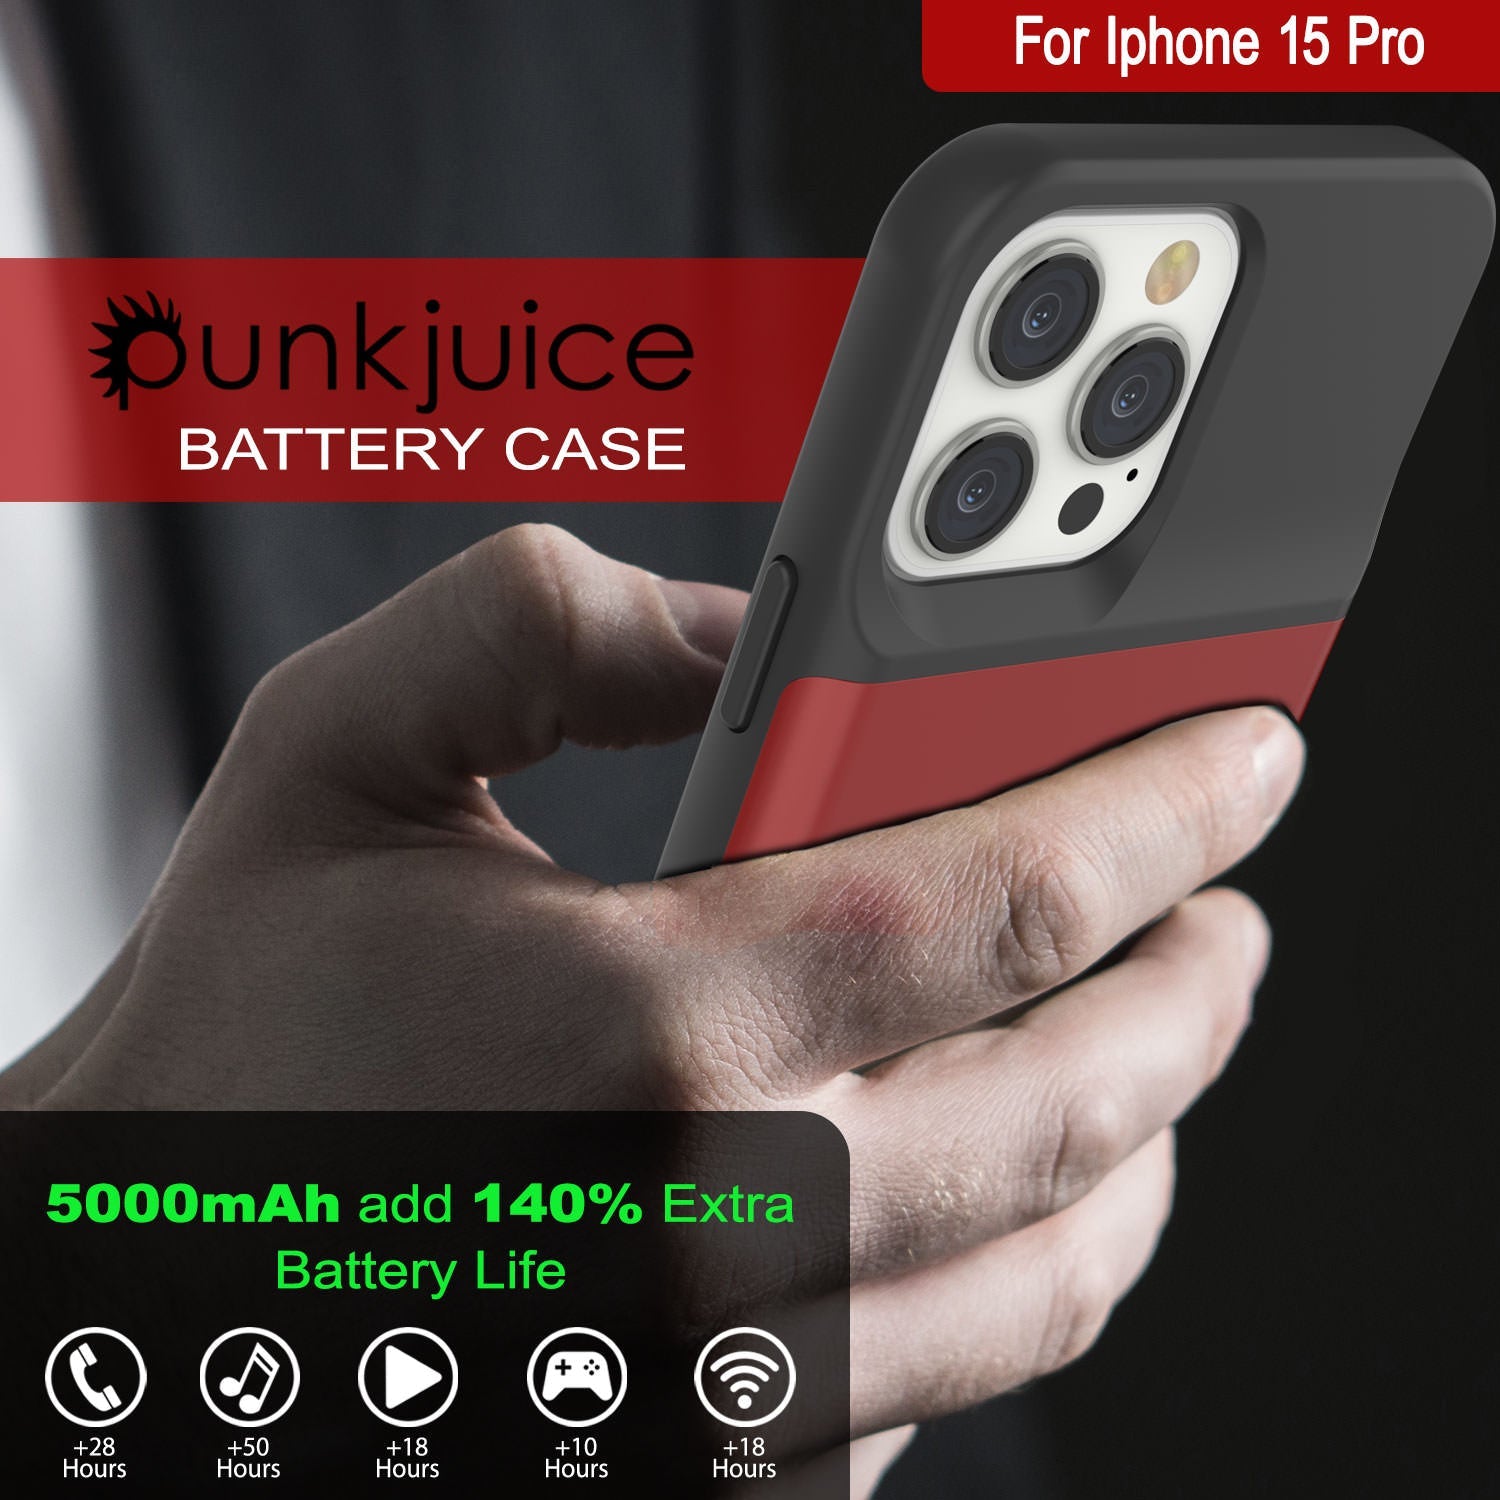 iPhone 15 Pro Battery Case, PunkJuice 5000mAH Fast Charging Power Bank W/ Screen Protector | [Red]